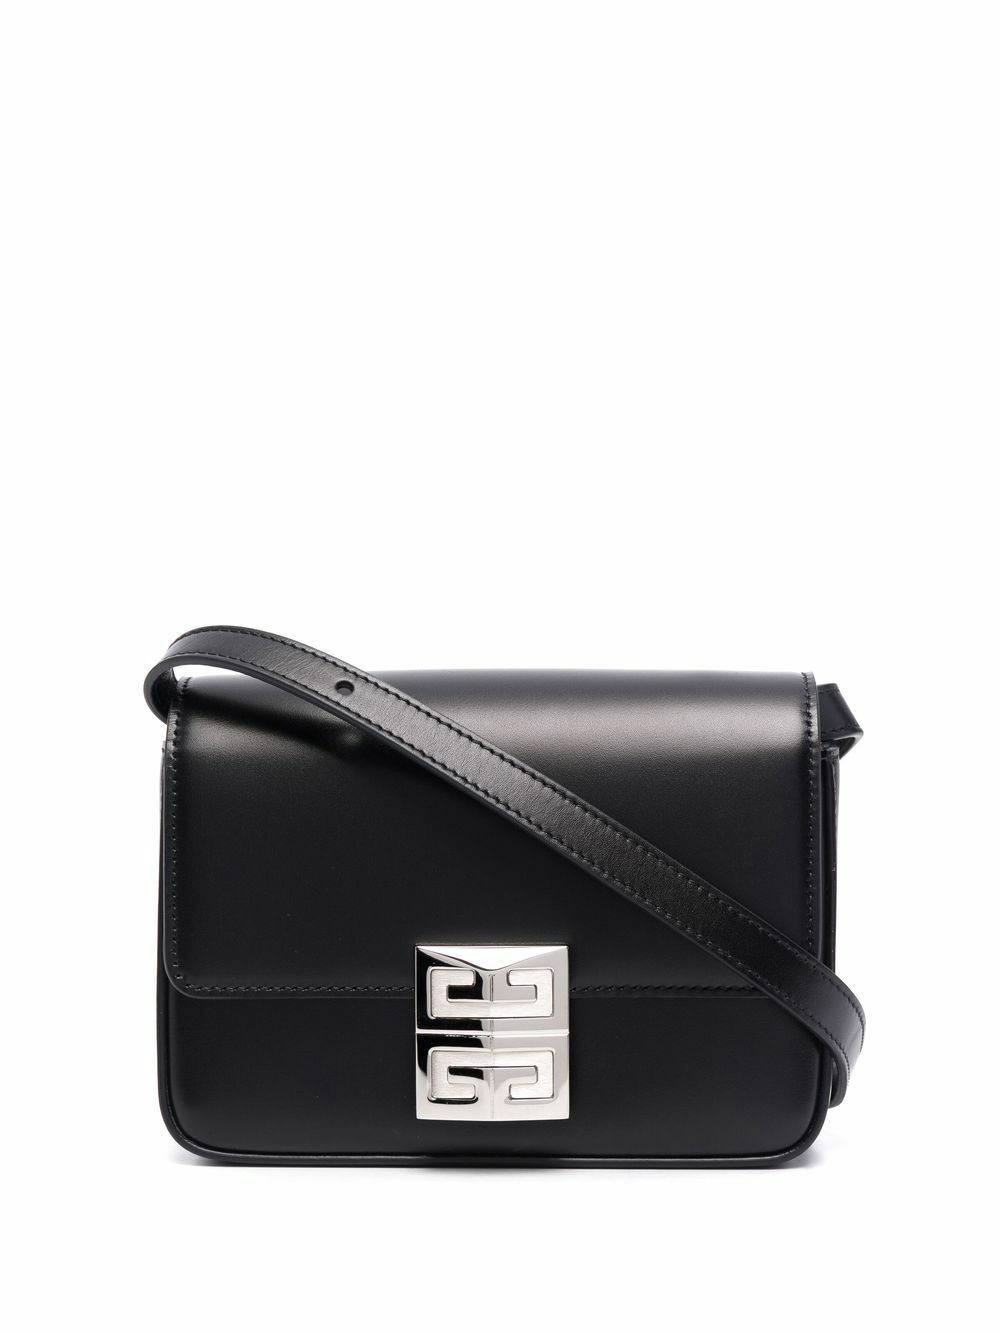 GIVENCHY - 4g Small Leather Crossbody Bag Givenchy